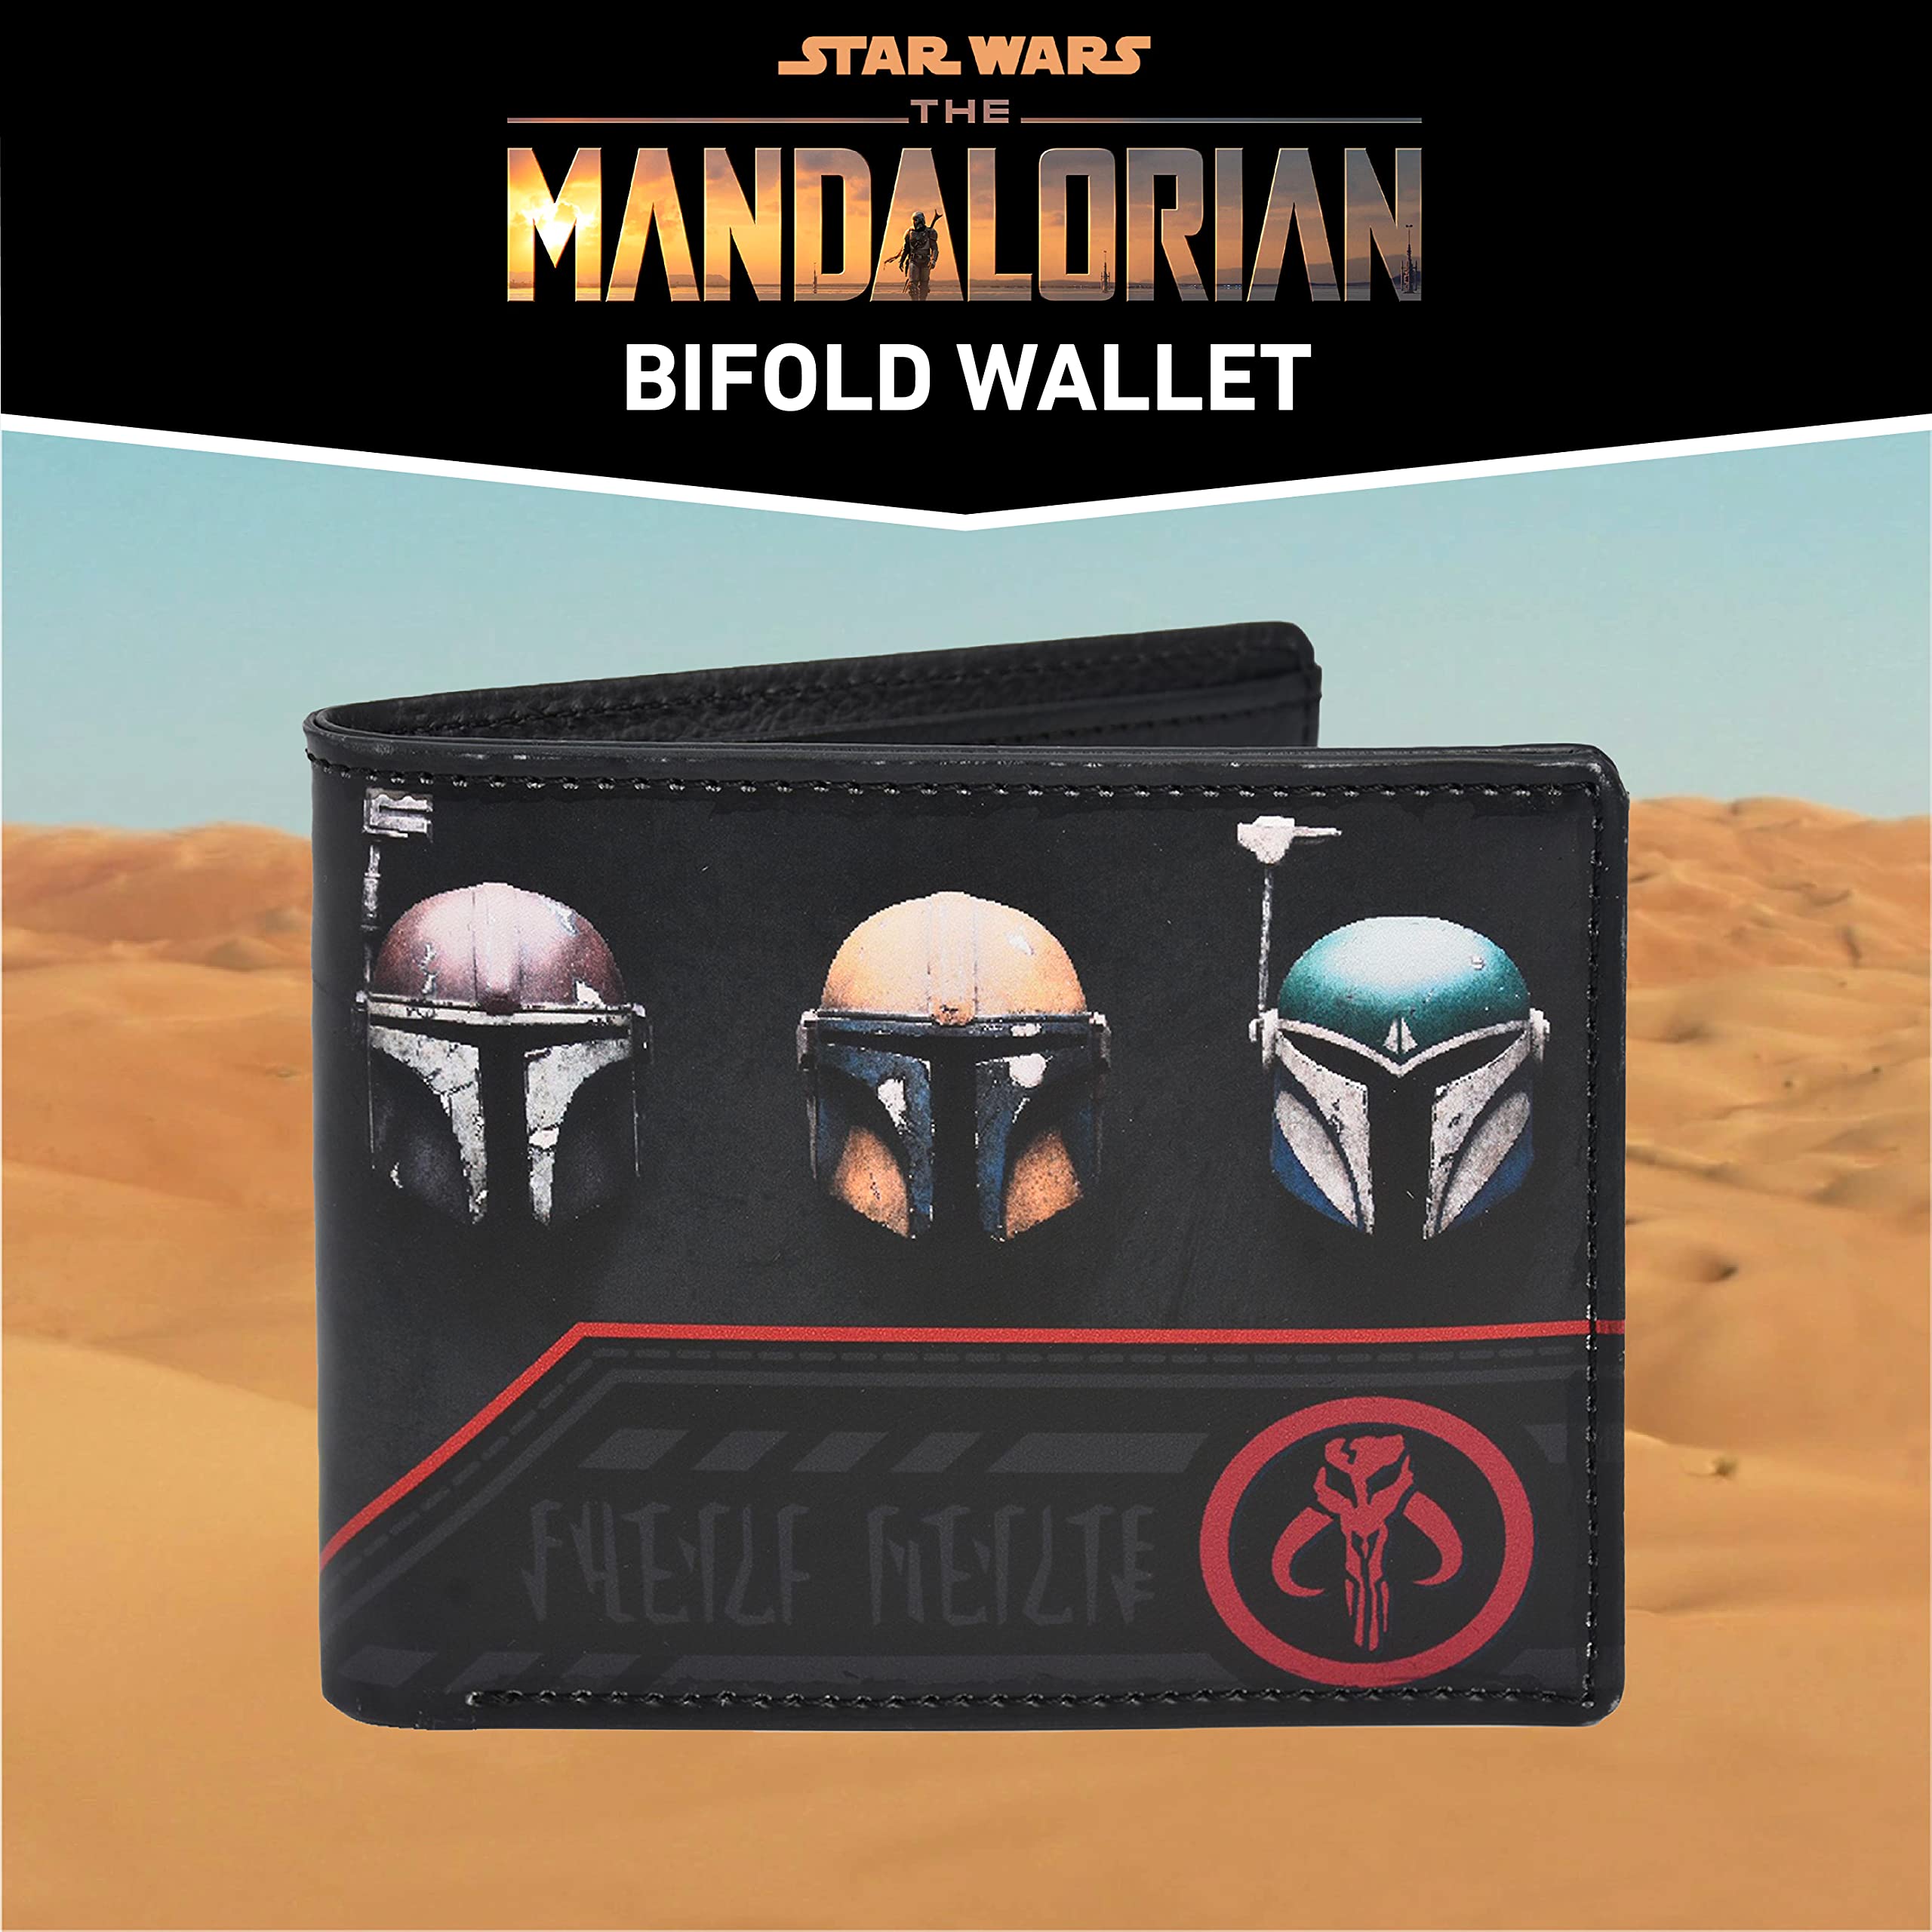 Star Wars The Mandalorian Wallet, Slim Bifold Wallet with Decorative Tin Case, Black and Red